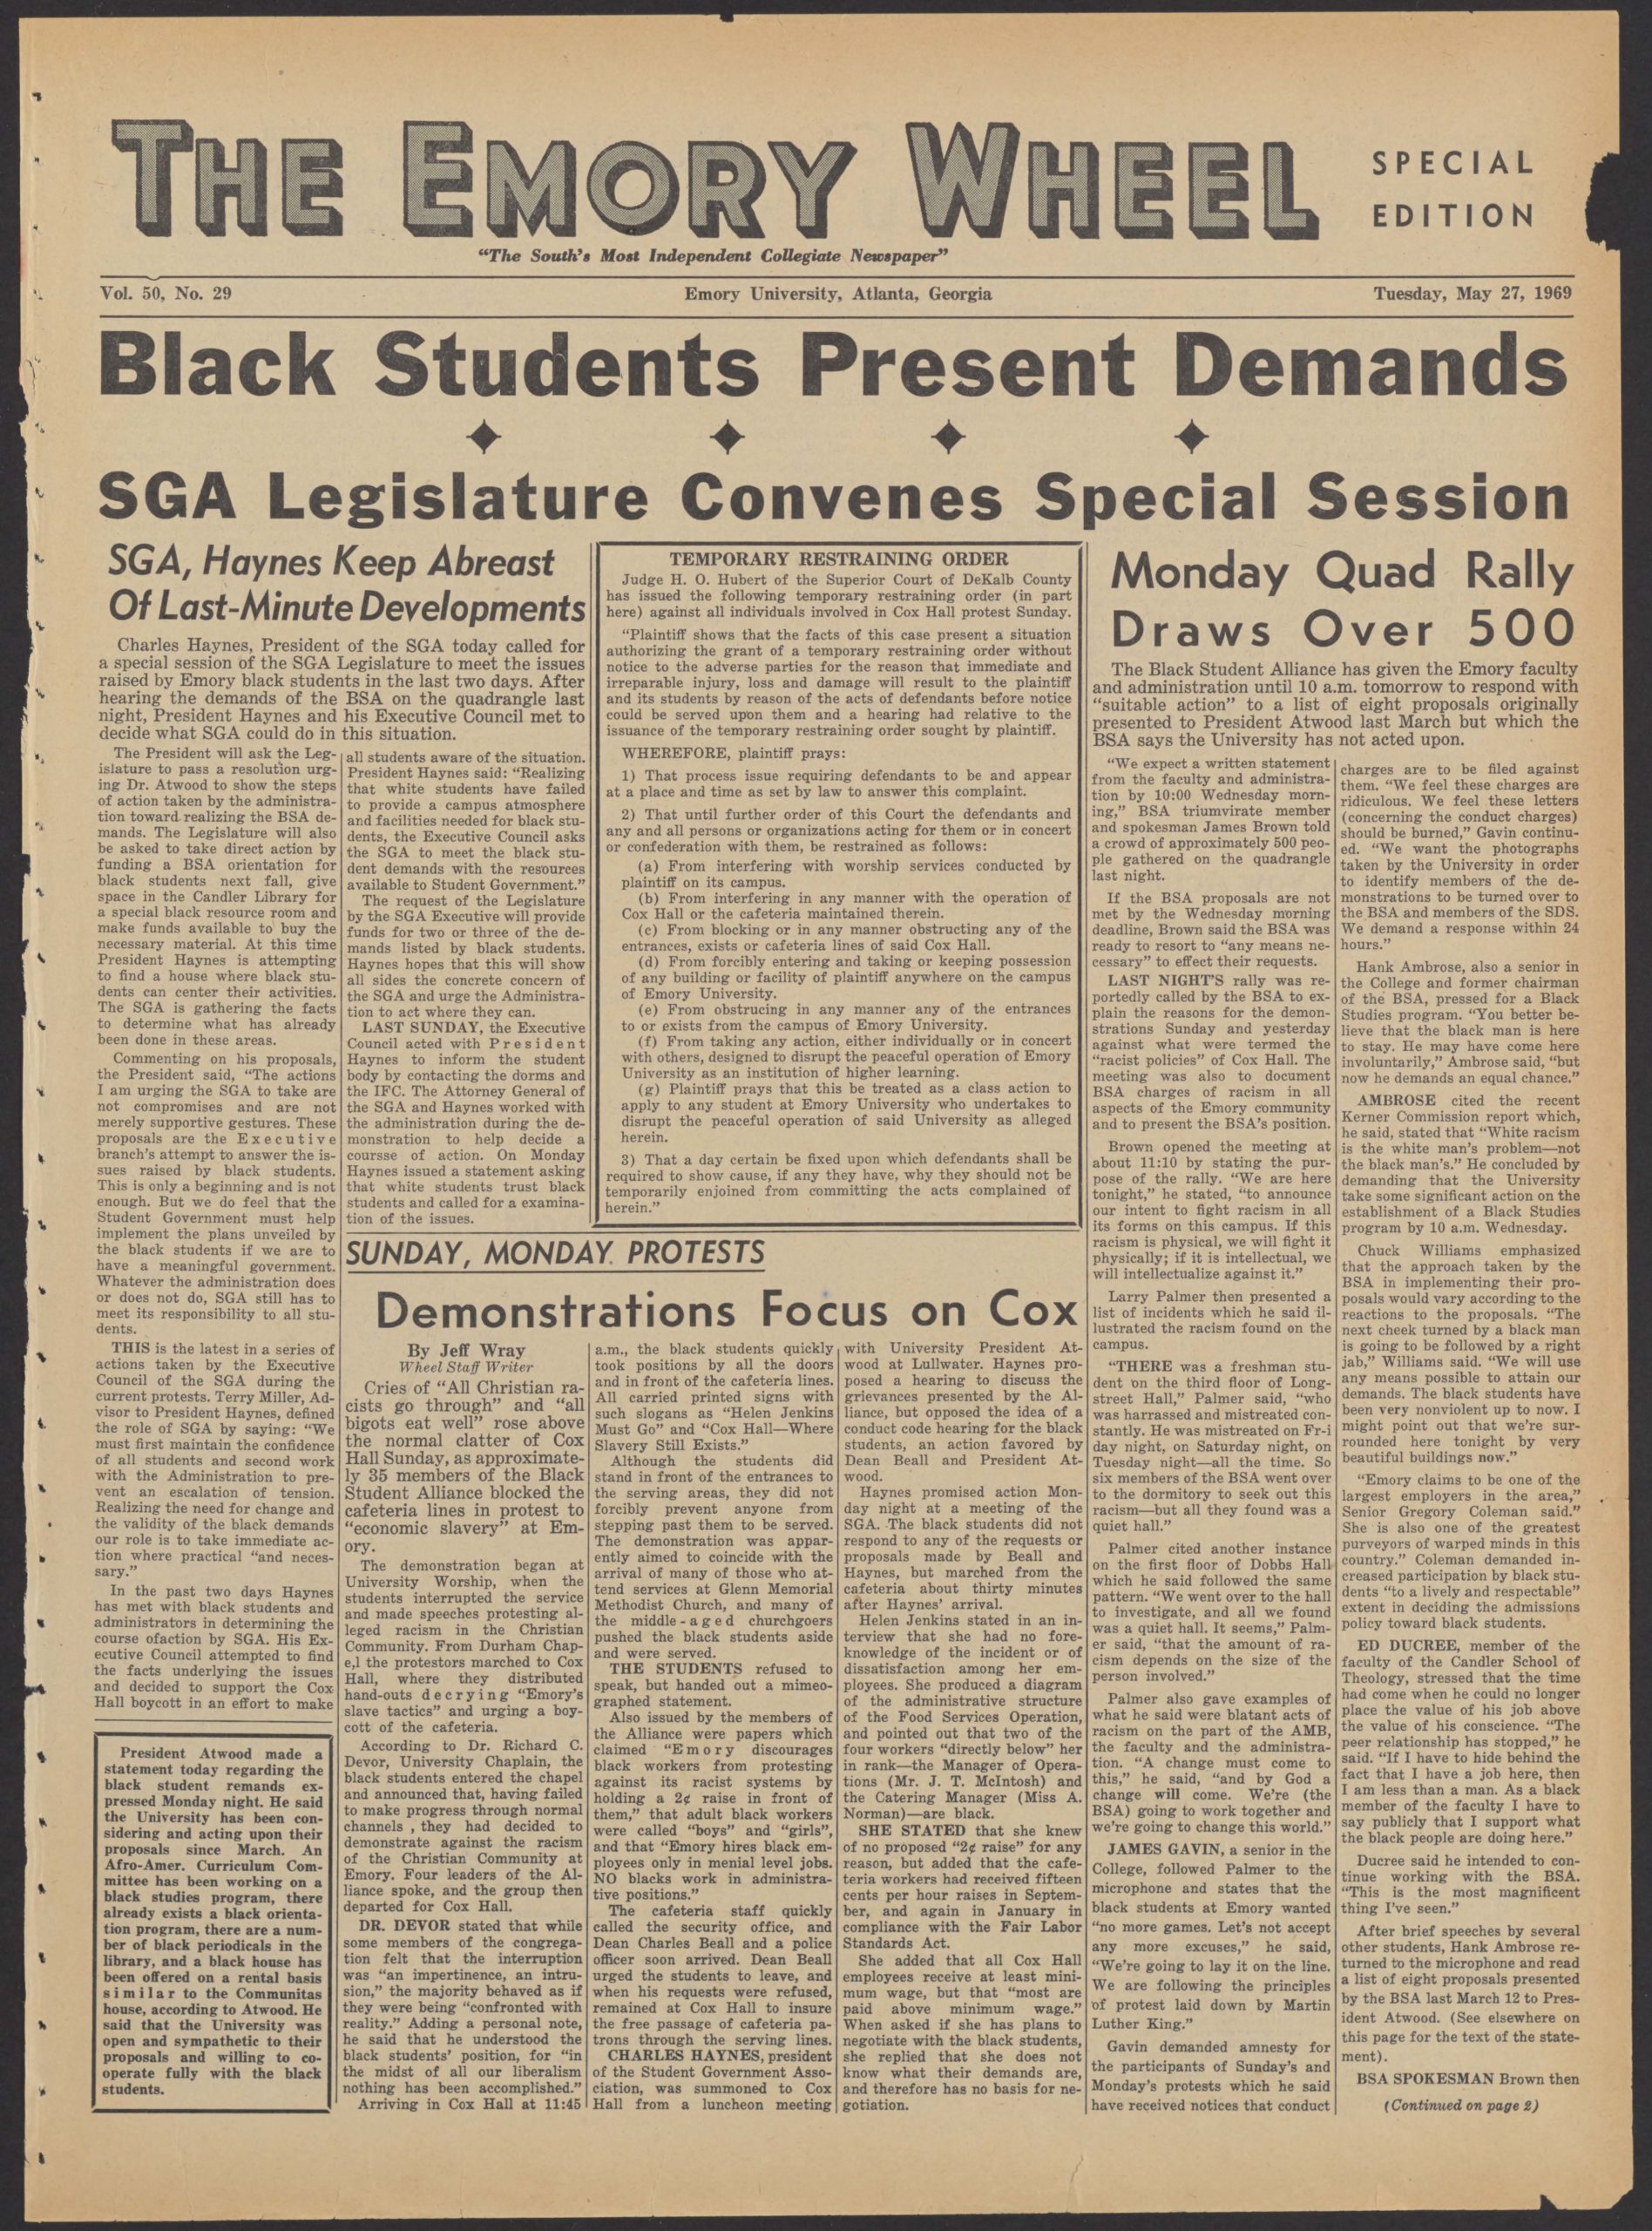 Emory Wheel newspaper front page covering Black student activism